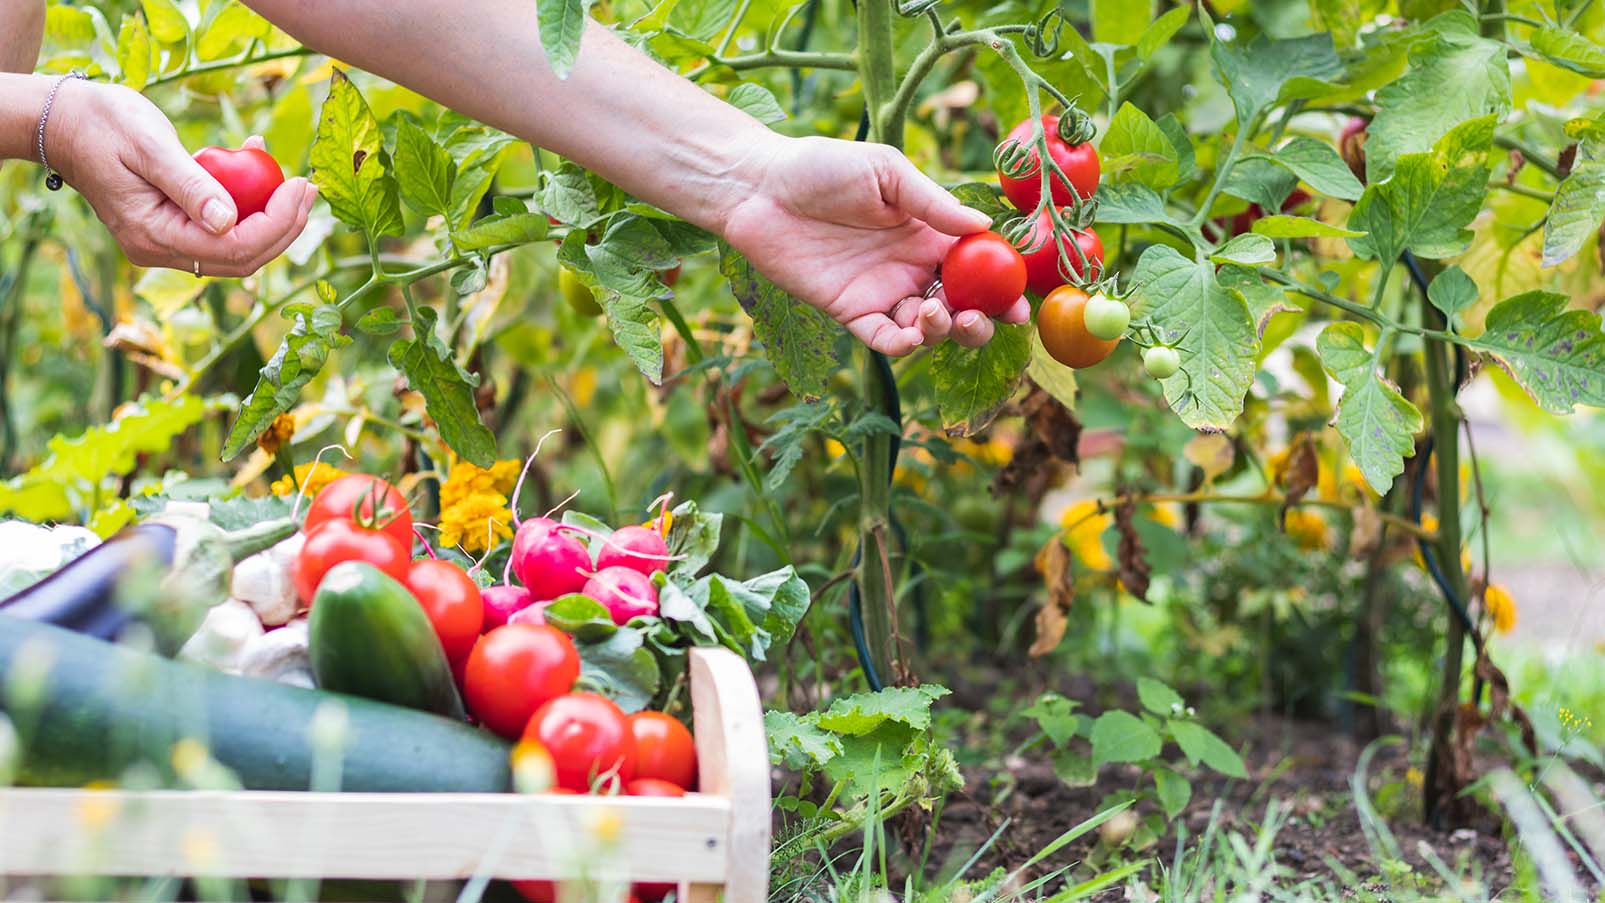 Food gardening for beginners: Learn to grow fruits and vegetables